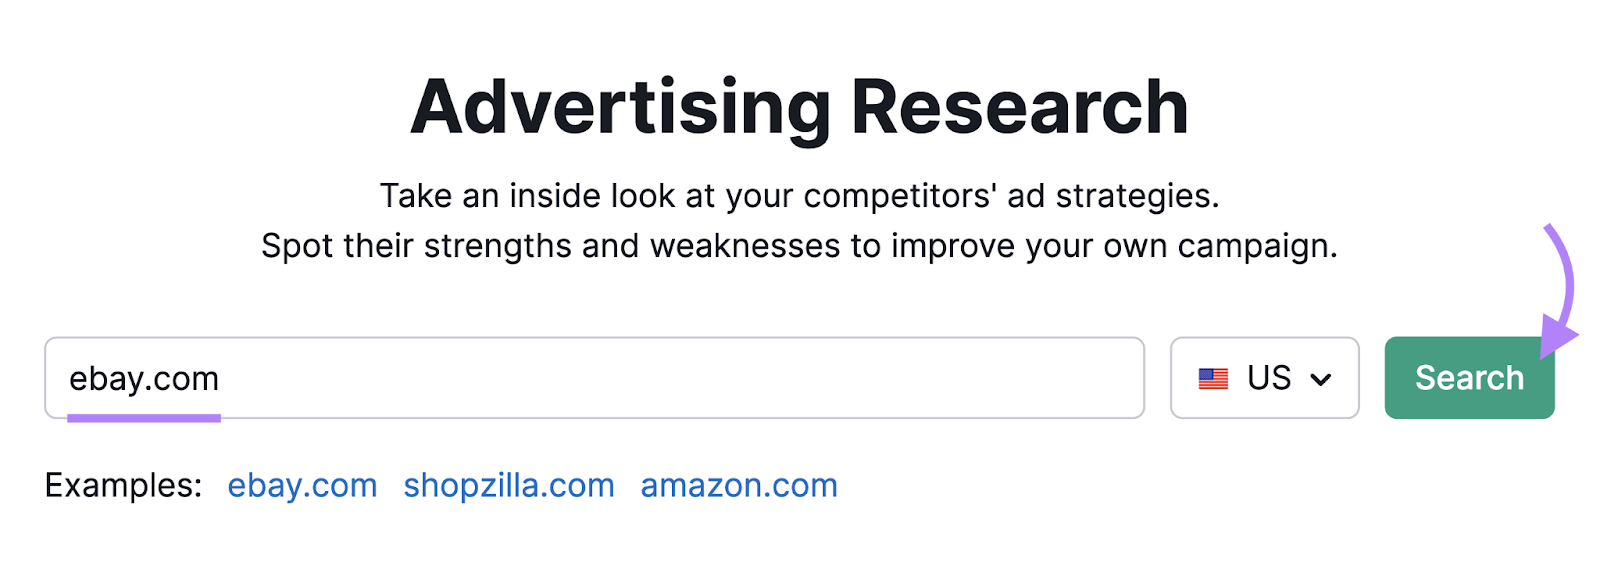 Search ebay.com in the Advertising Research tool.